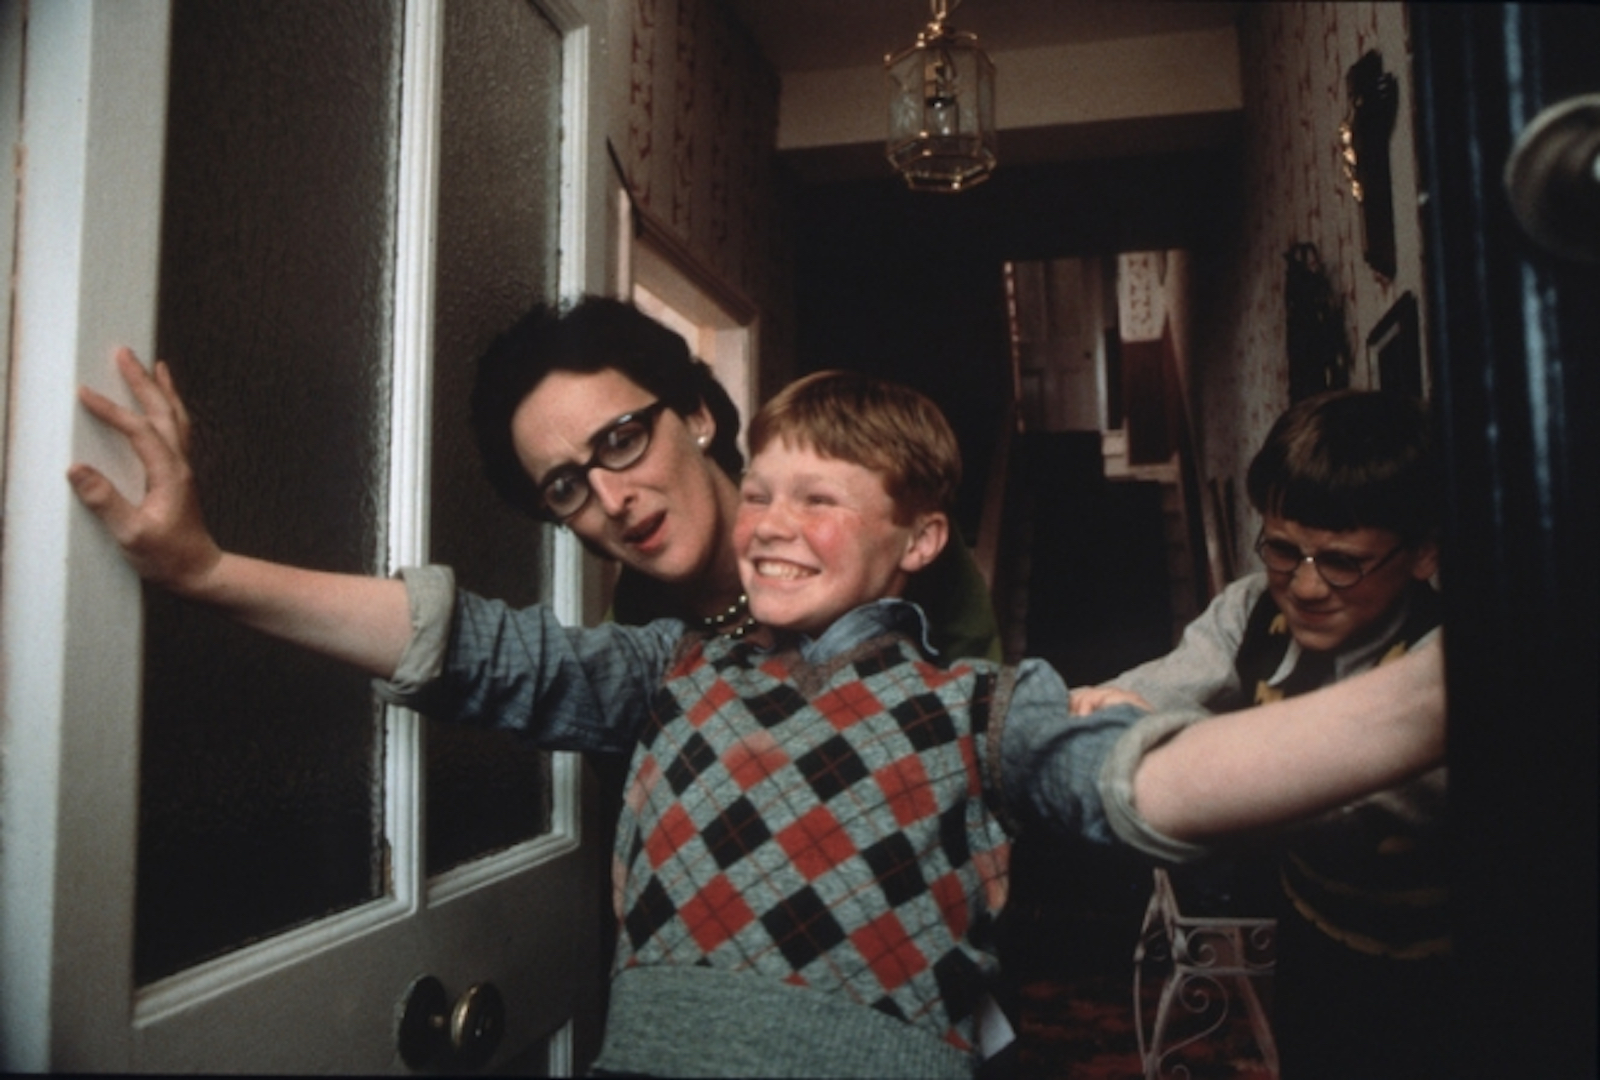 A red-headed boy in an argyle vest smilingly holds his arms across a doorway as two others peek out behind him